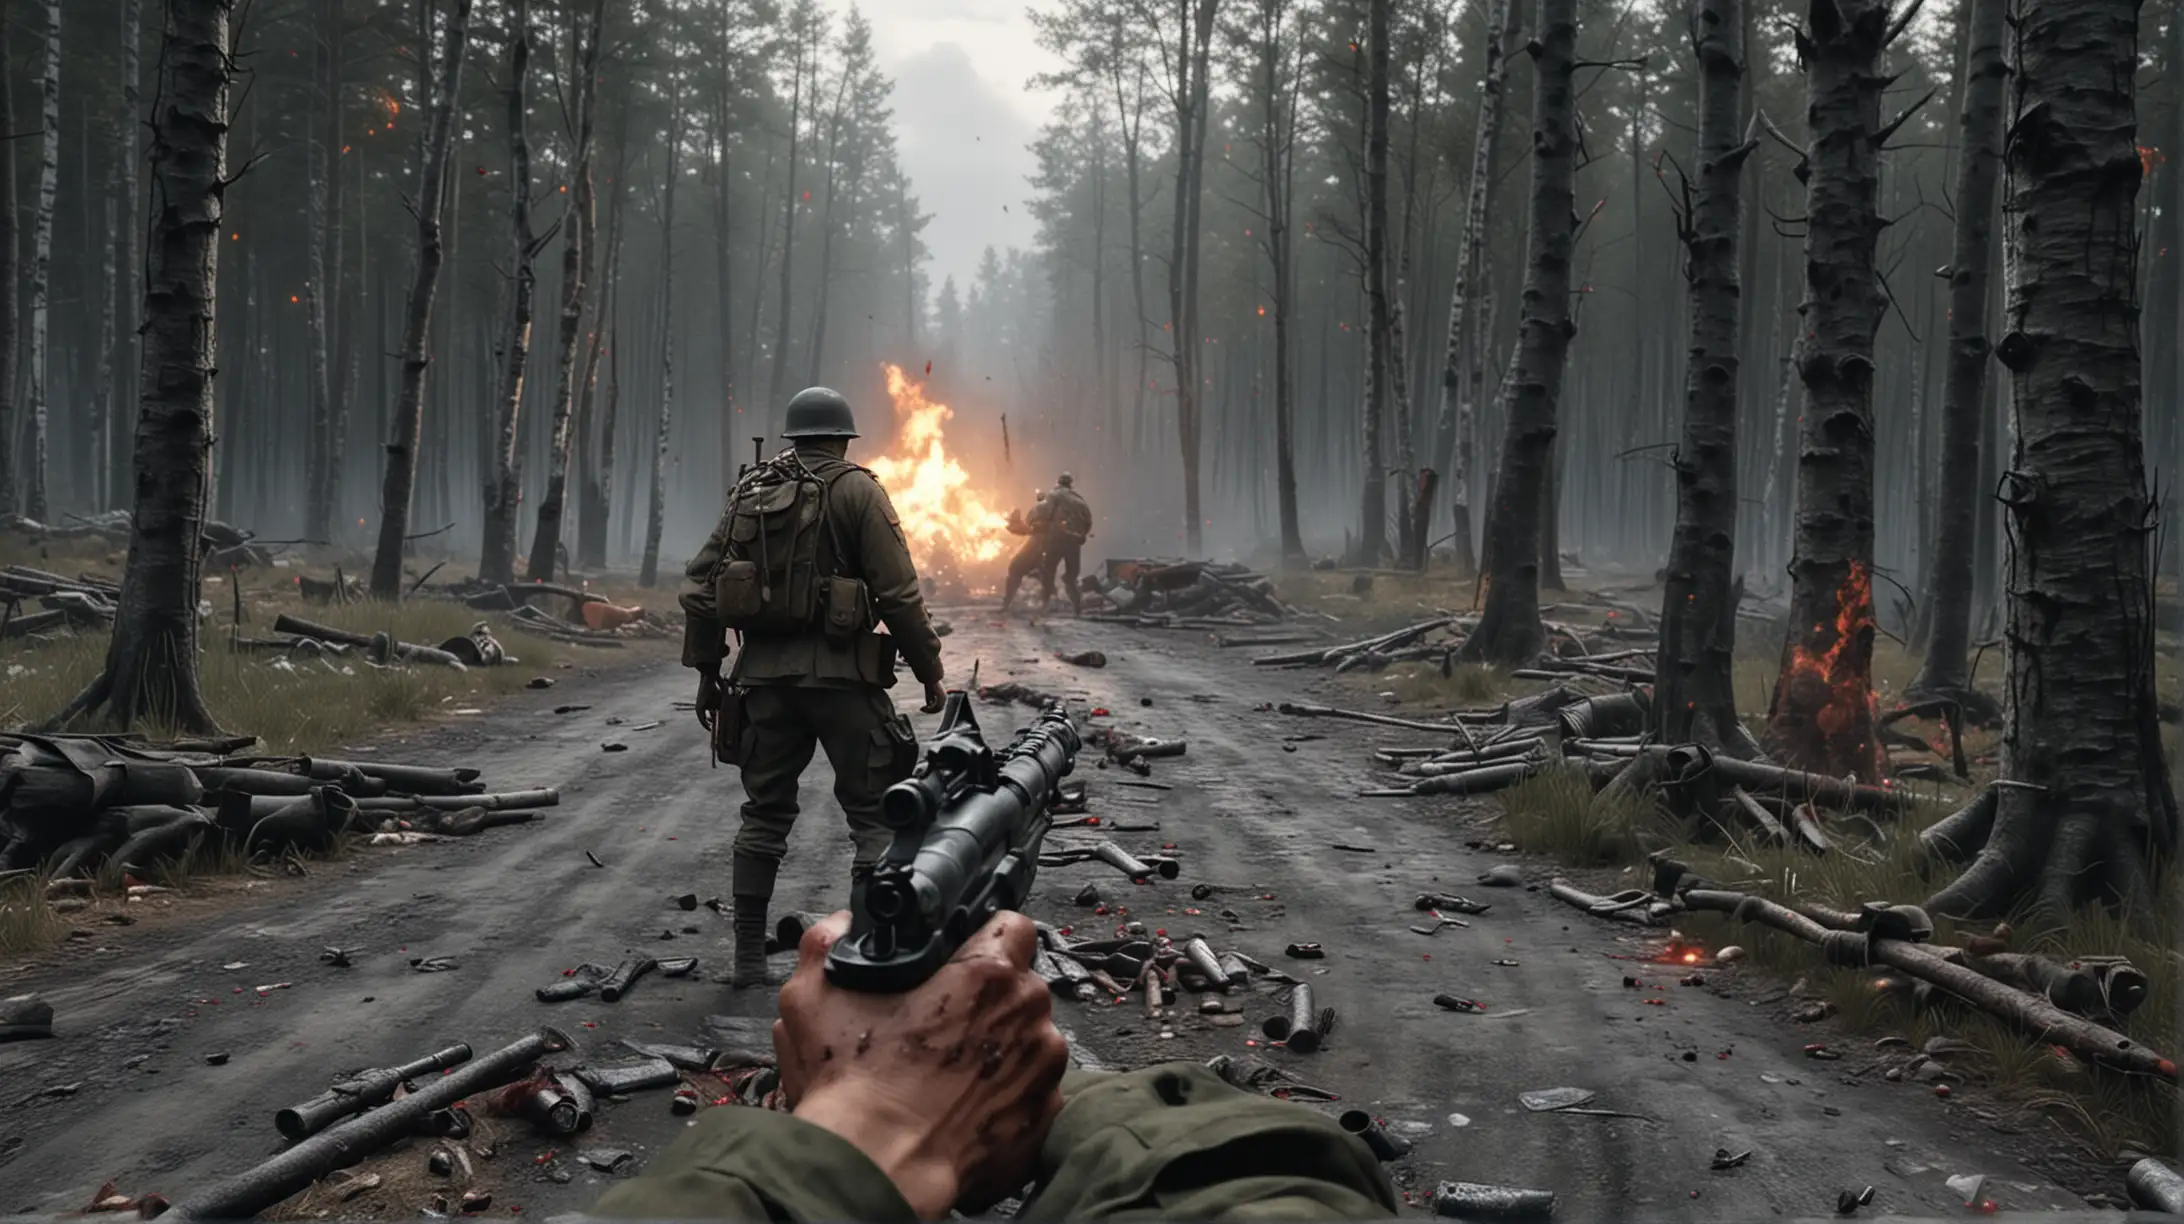 First Person POV Soldier Shooting Enemies in Bloody Battle of the Bulge